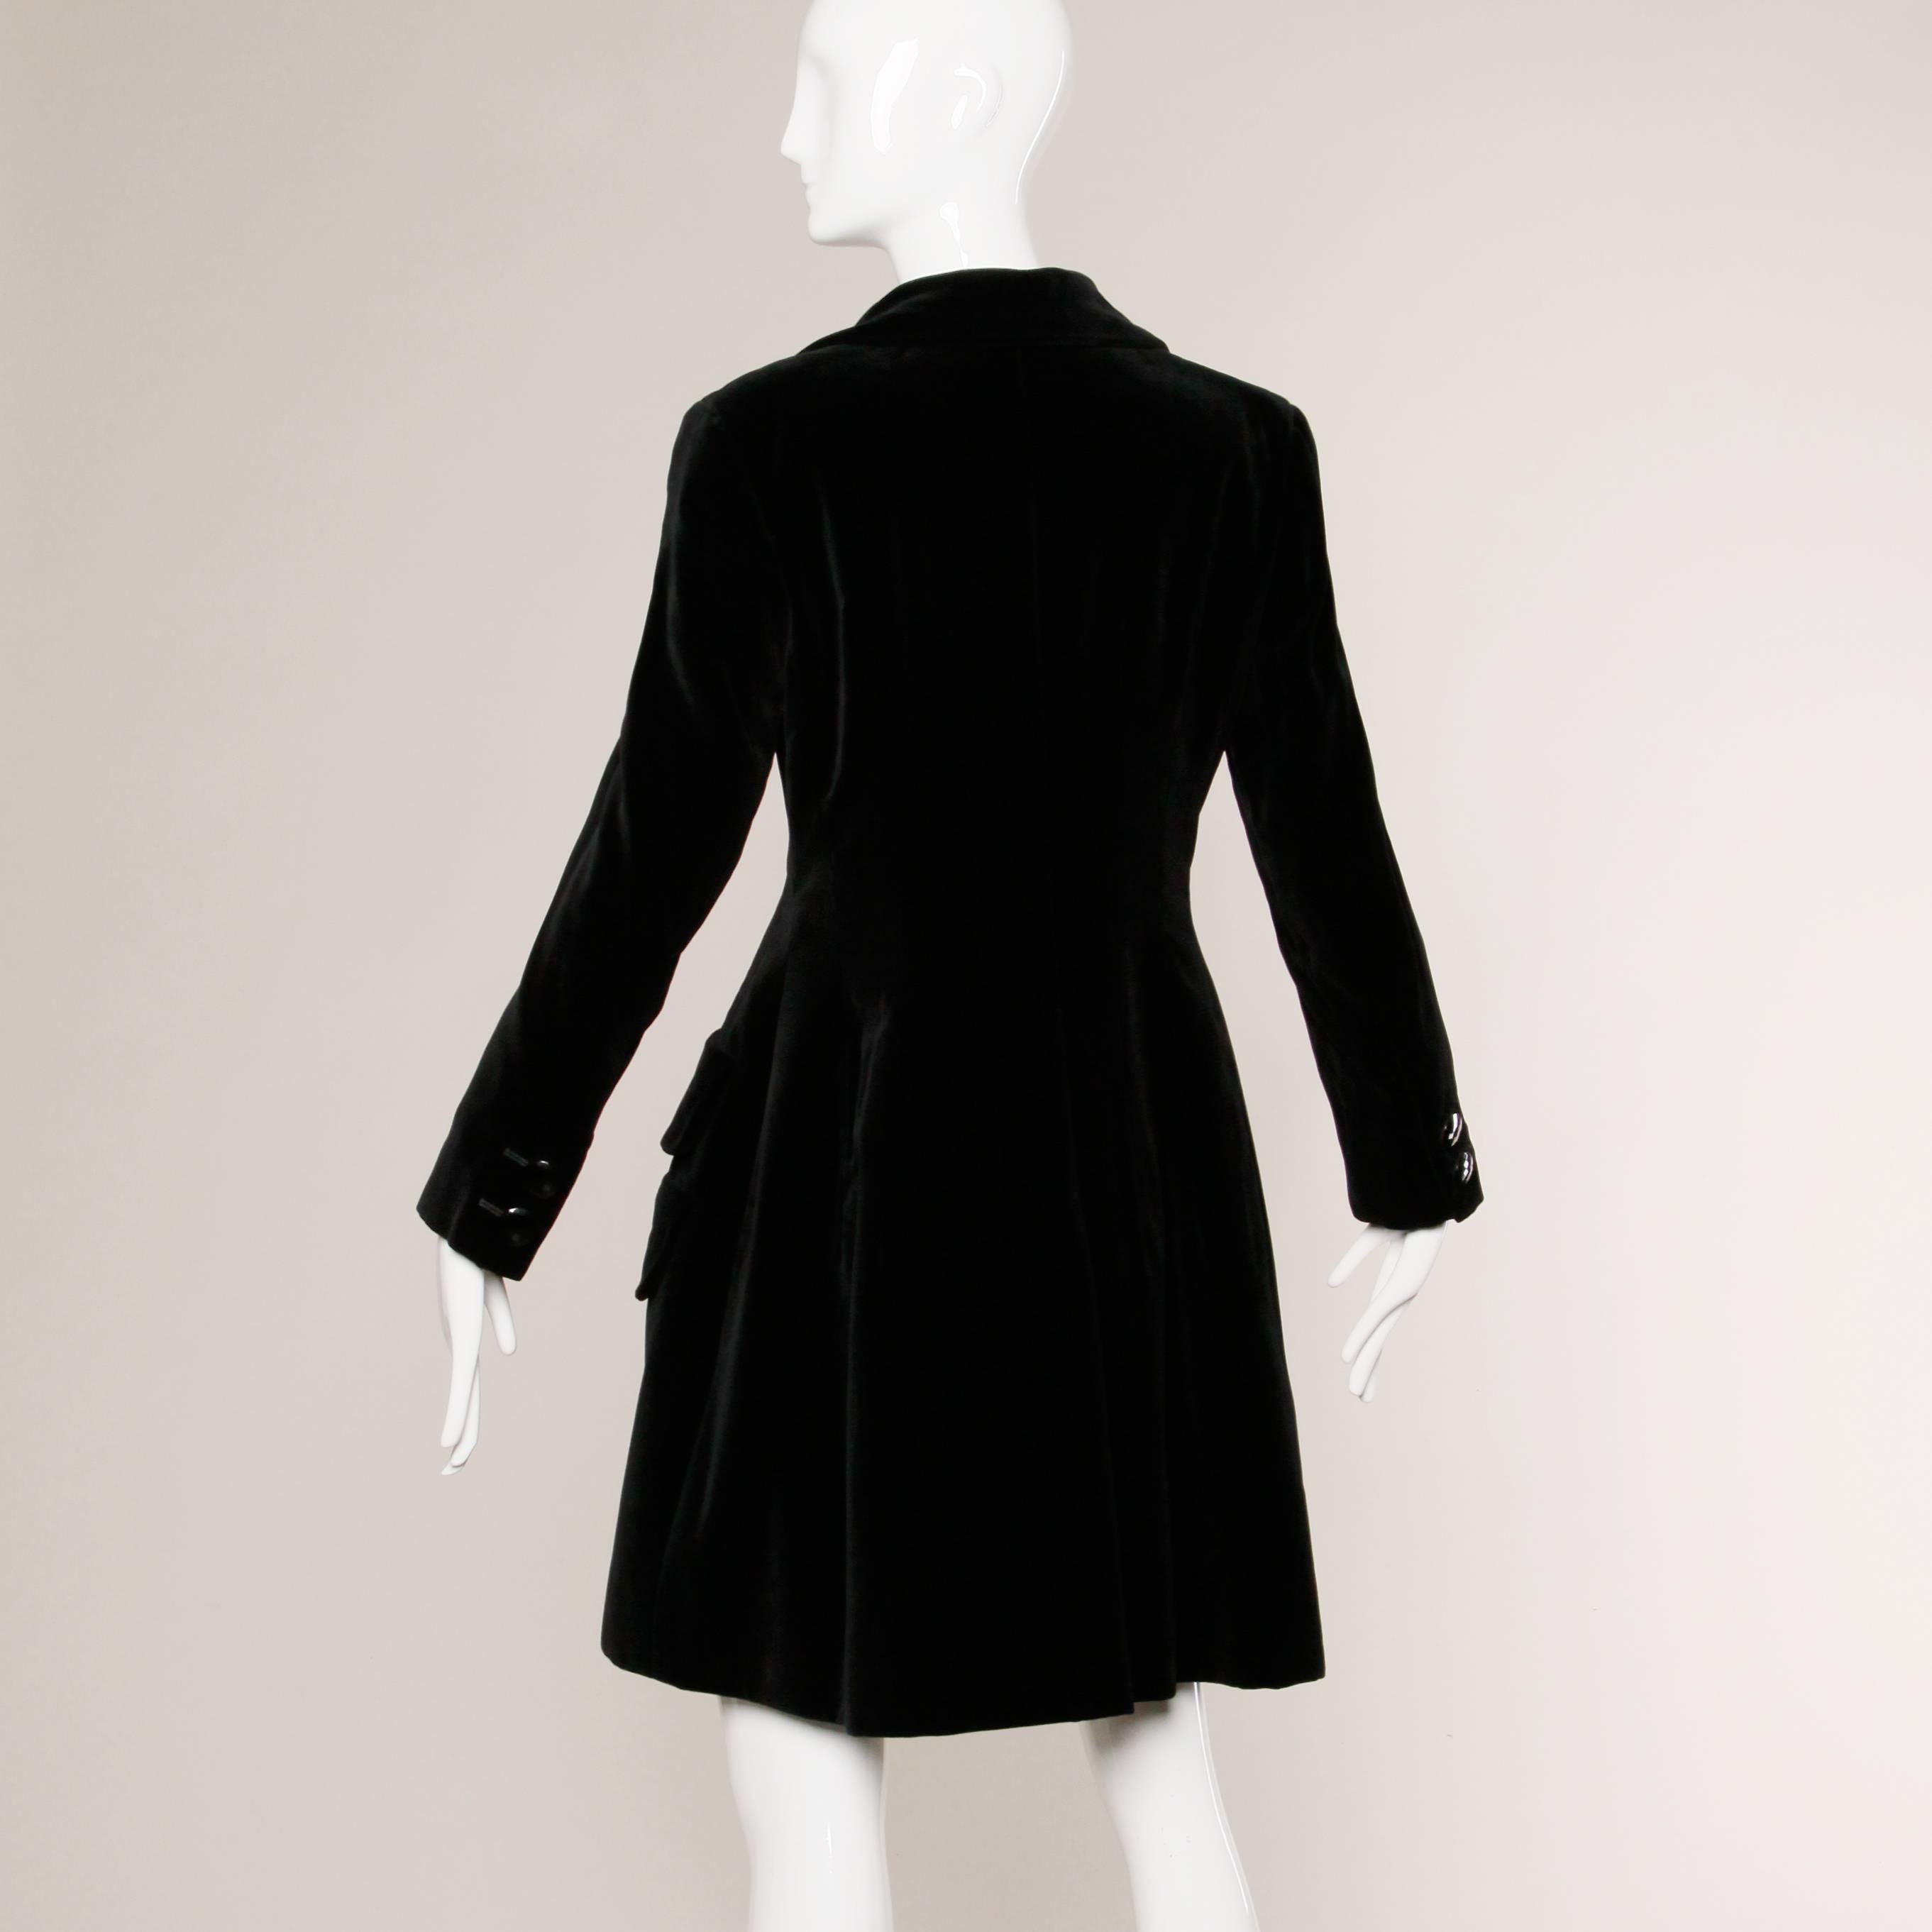 Gorgeous vintage Valentino black velvet coat with shiny double breasted black buttons and pop up collar. Beautiful construction with front pockets.

Details:

Fully Lined
Pockets
Matching Belt
Shoulder Pads Sewn Into Lining
Front Button